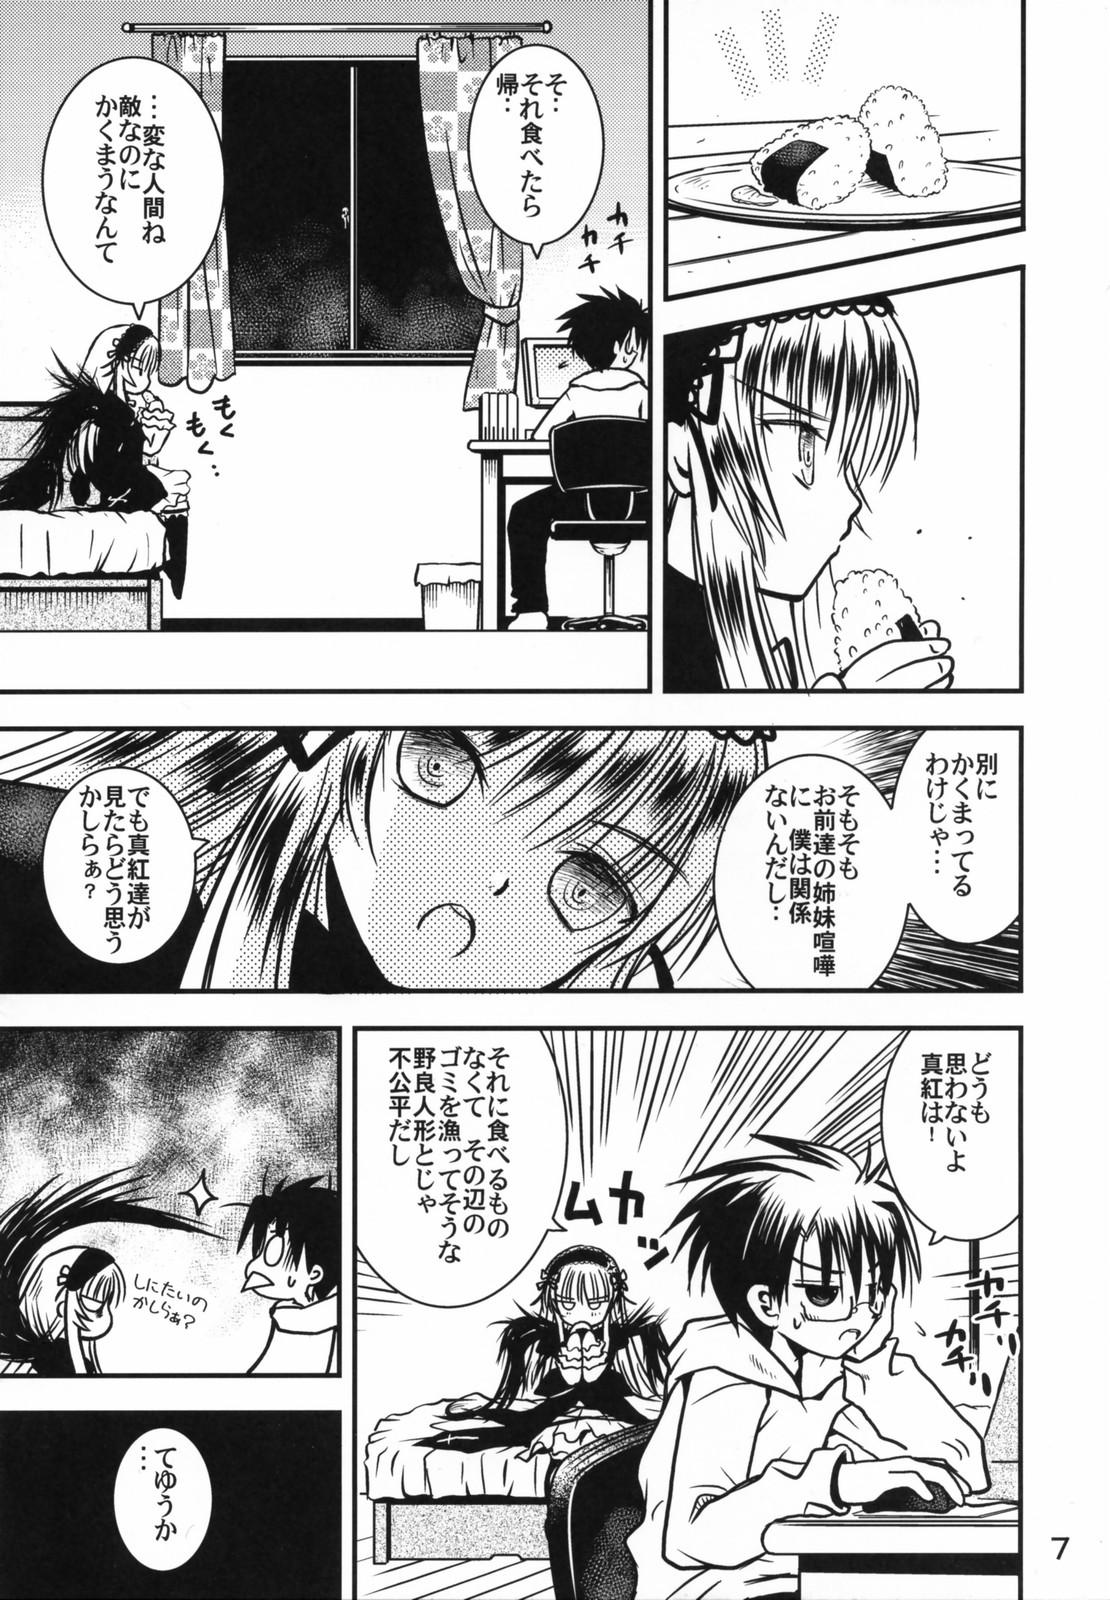 Hot Naked Girl A caprice - Rozen maiden Stepfather - Page 6